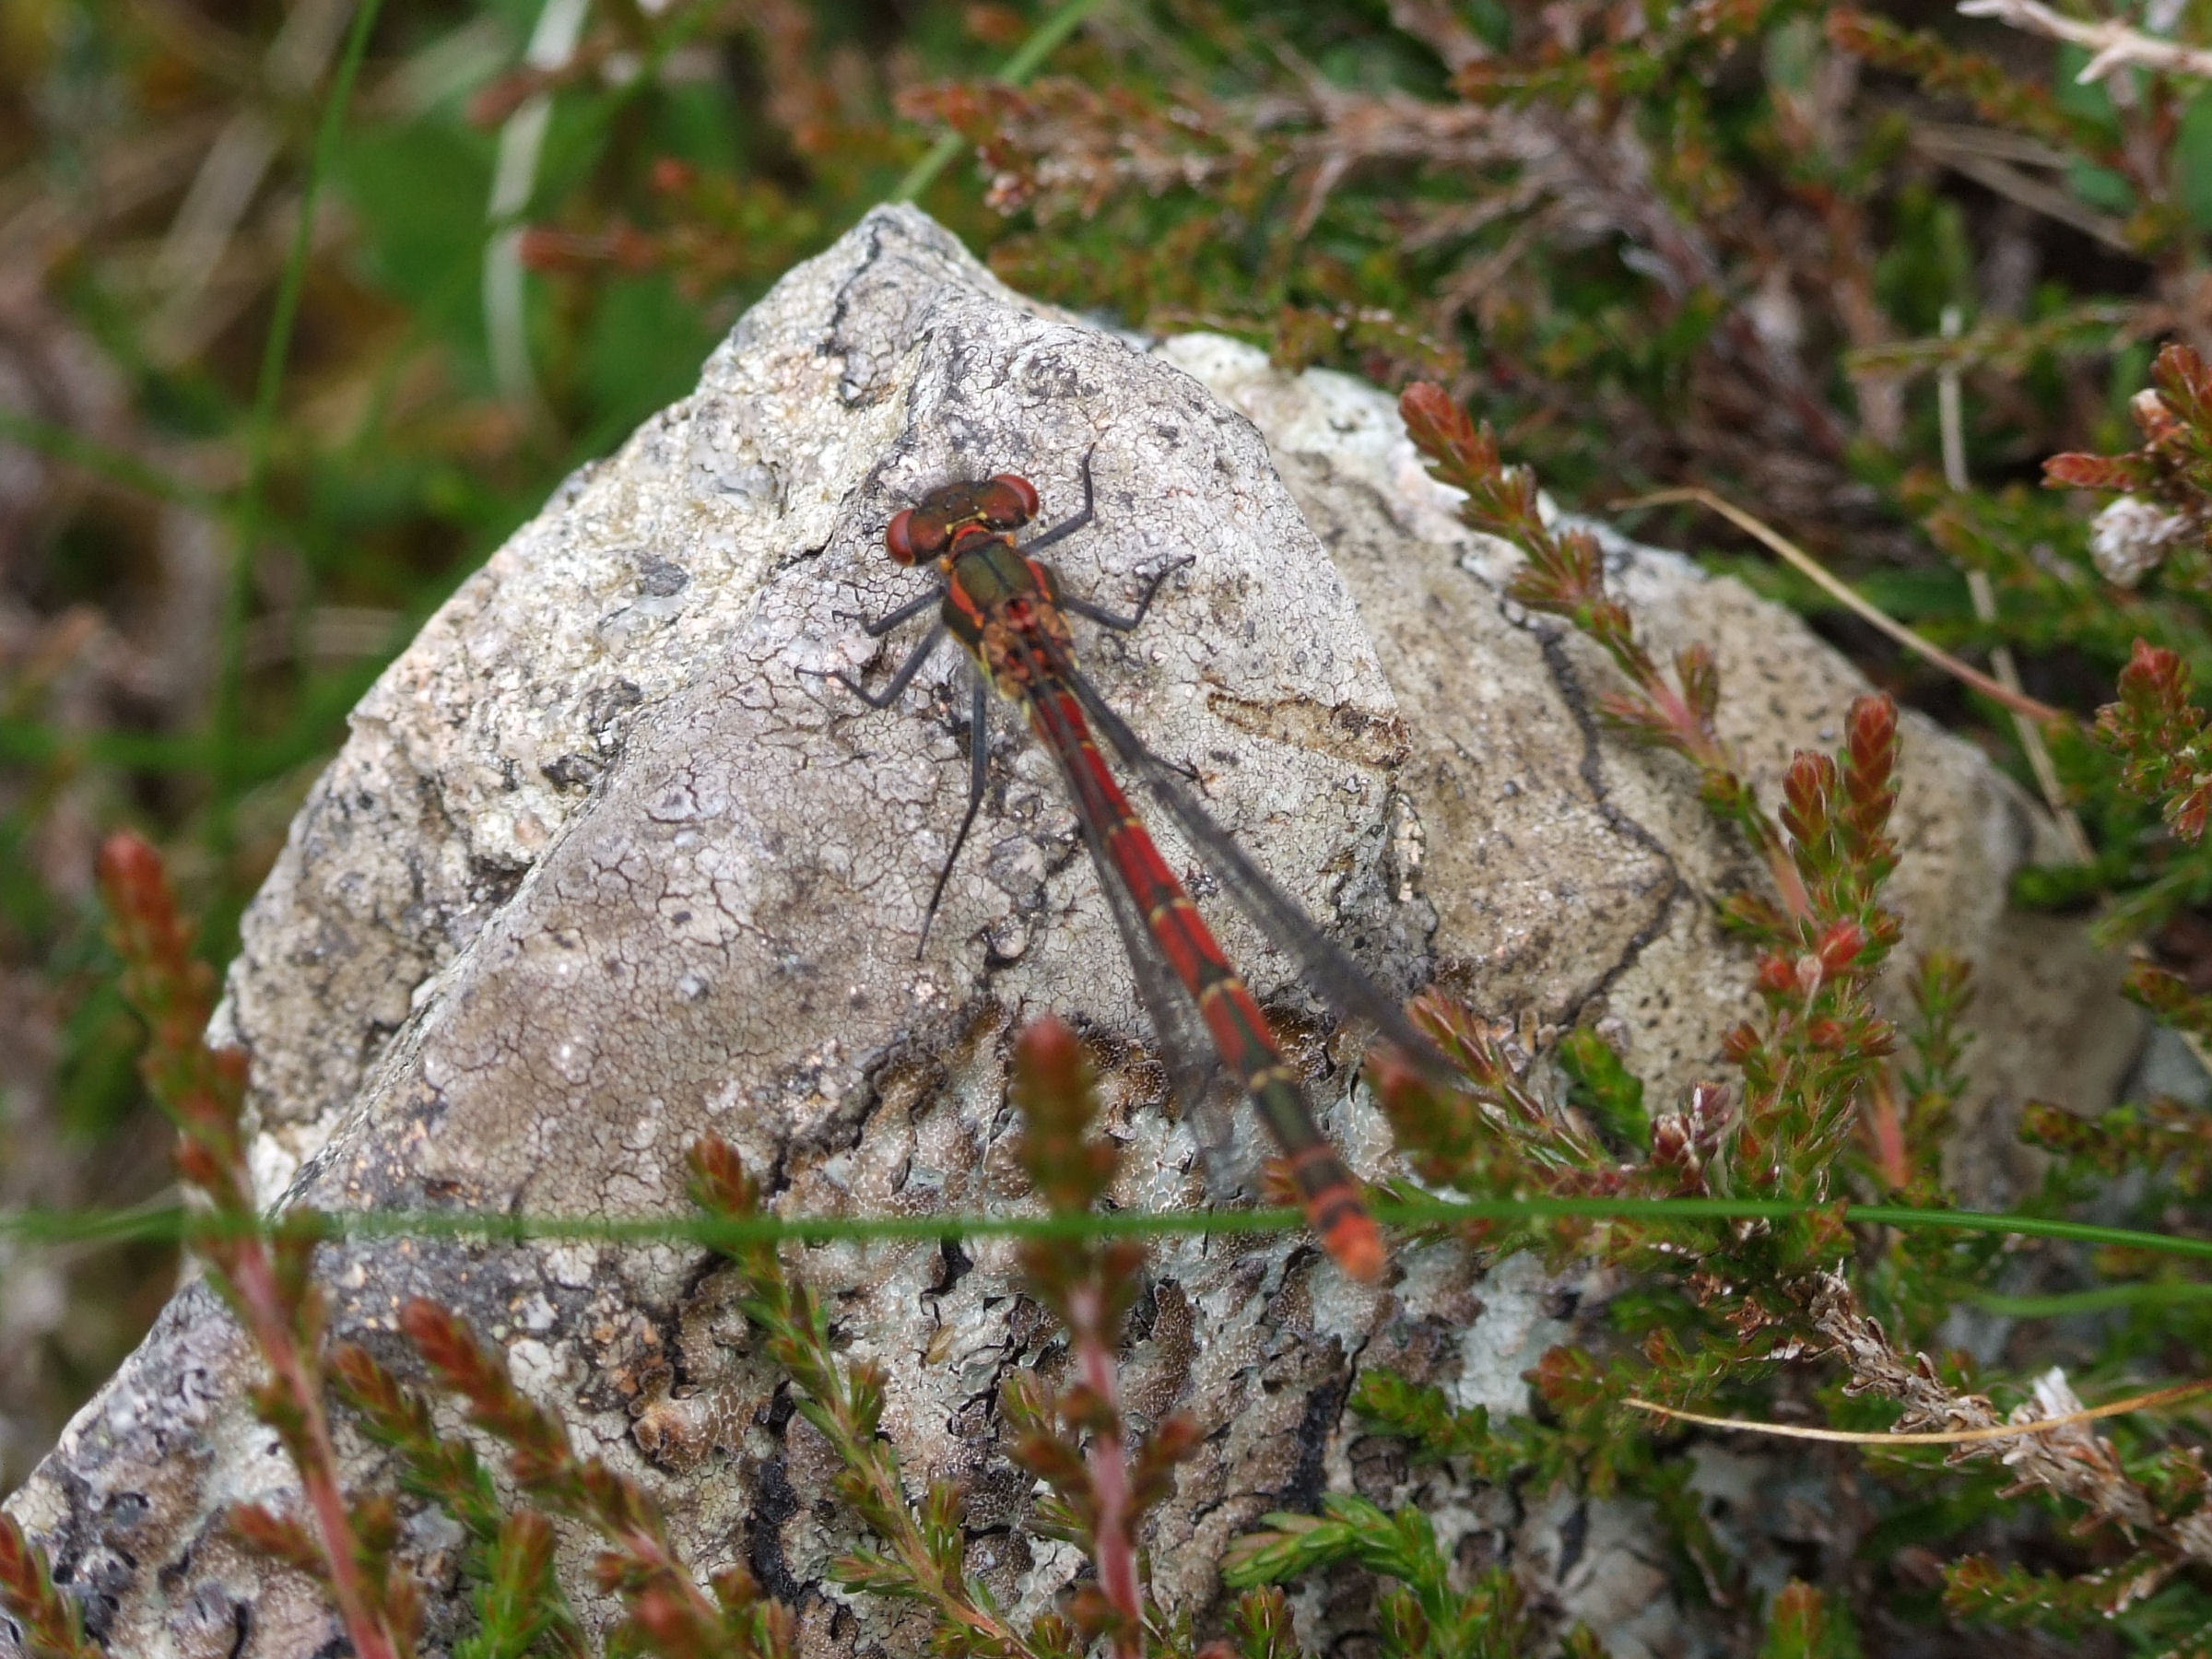 Photograph: Dragonfly